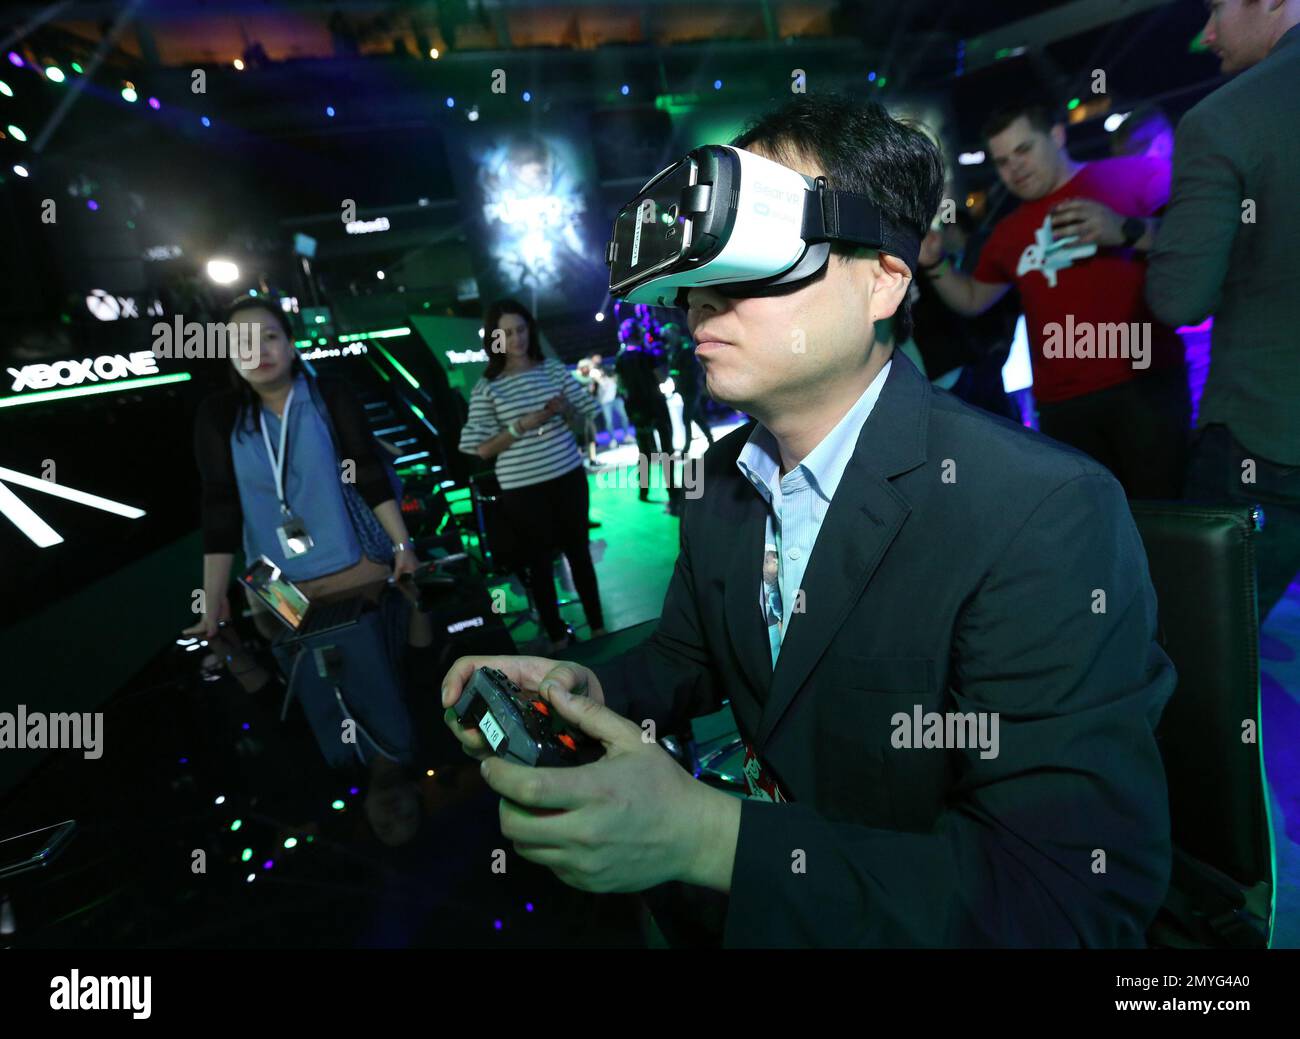 IMAGE DISTRIBUTED FOR MICROSOFT - Gamers experience "Minecraft" with Oculus  VR at the Xbox Media Showcase at E3 2016 in Los Angeles on Monday, June 13,  2016. (Photo by Casey Rodgers/Invision for